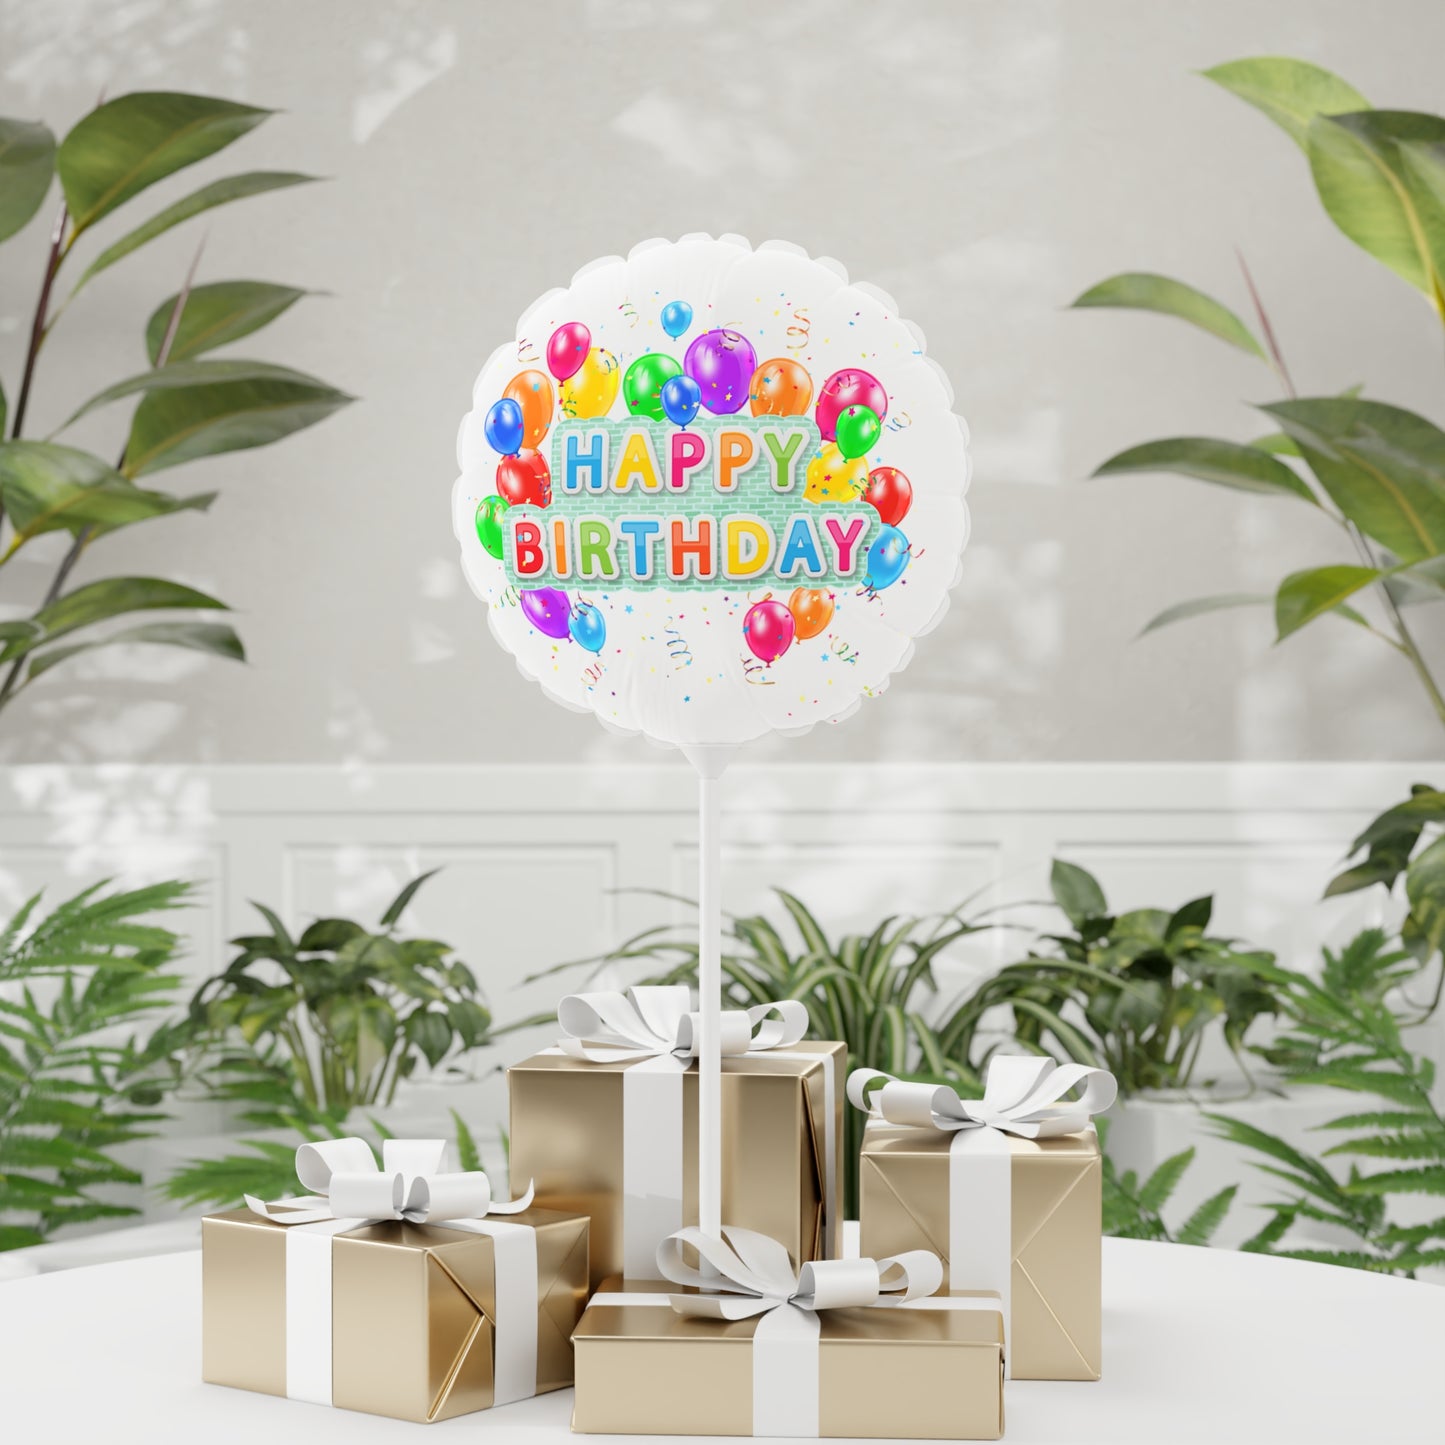 "Happy Birthday" Balloon (Round), 11", Inflate With Air Only, Indoor and Outdoor Decoration